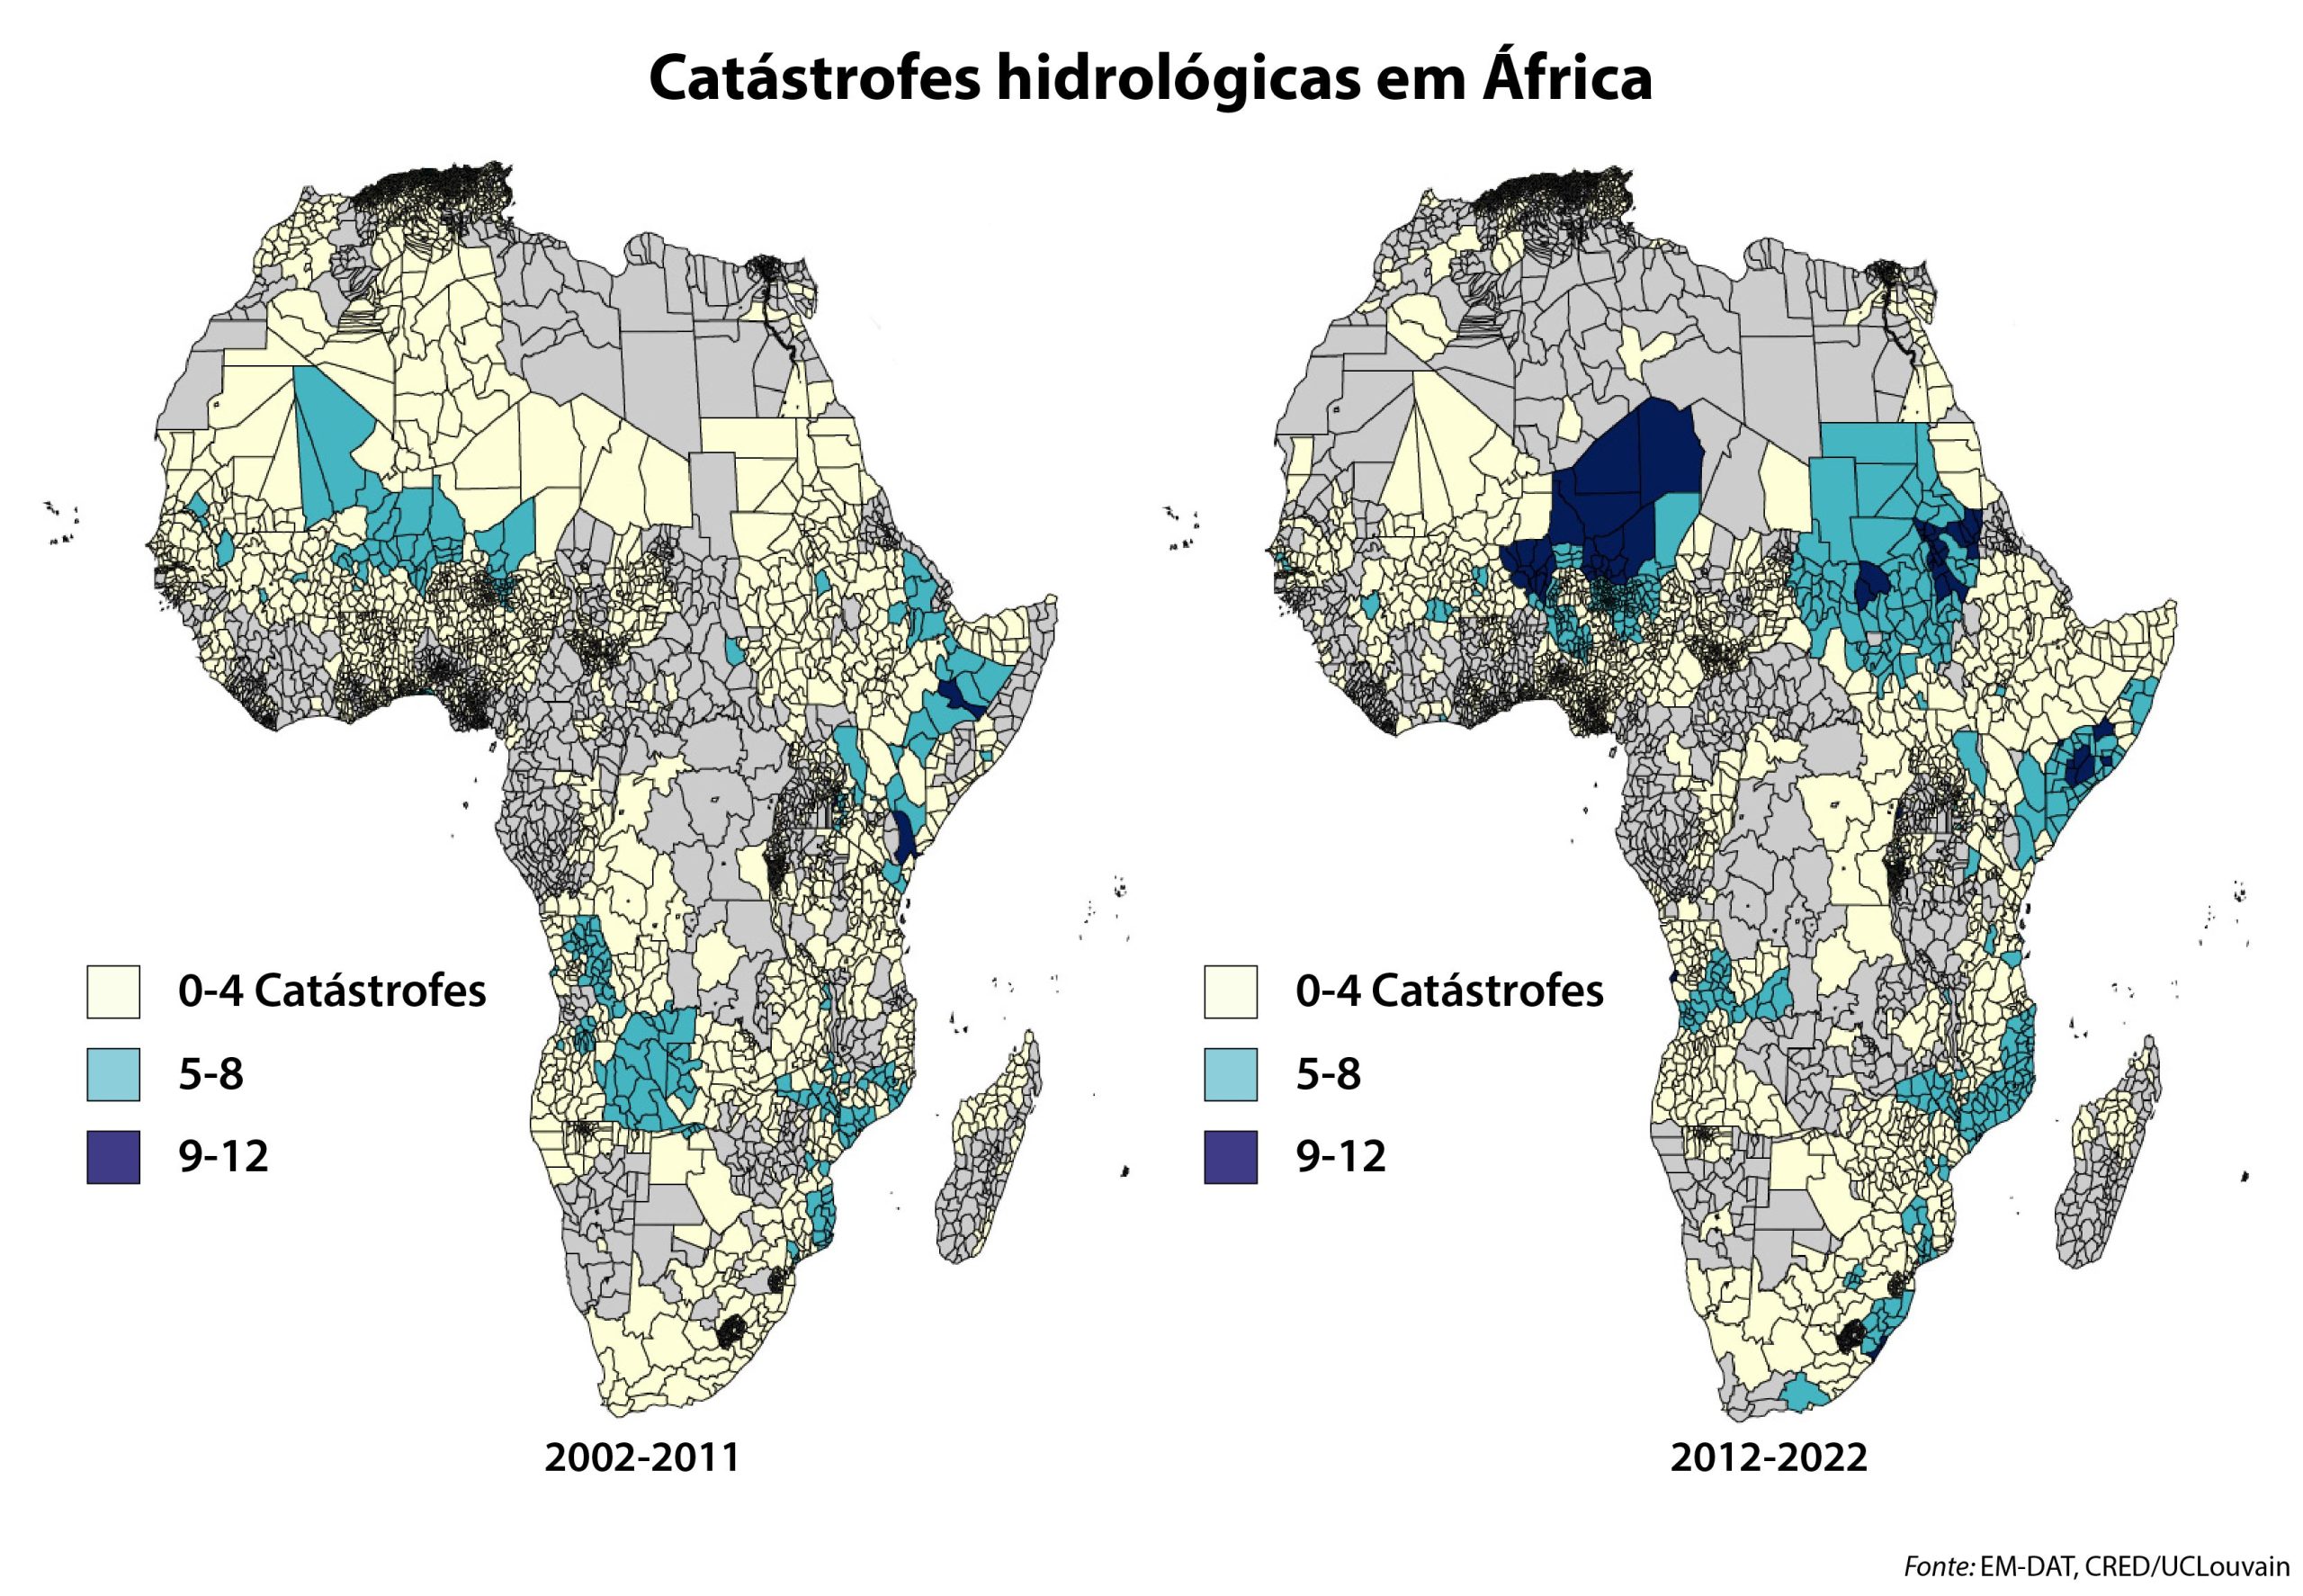 Hydrological Disasters in Africa